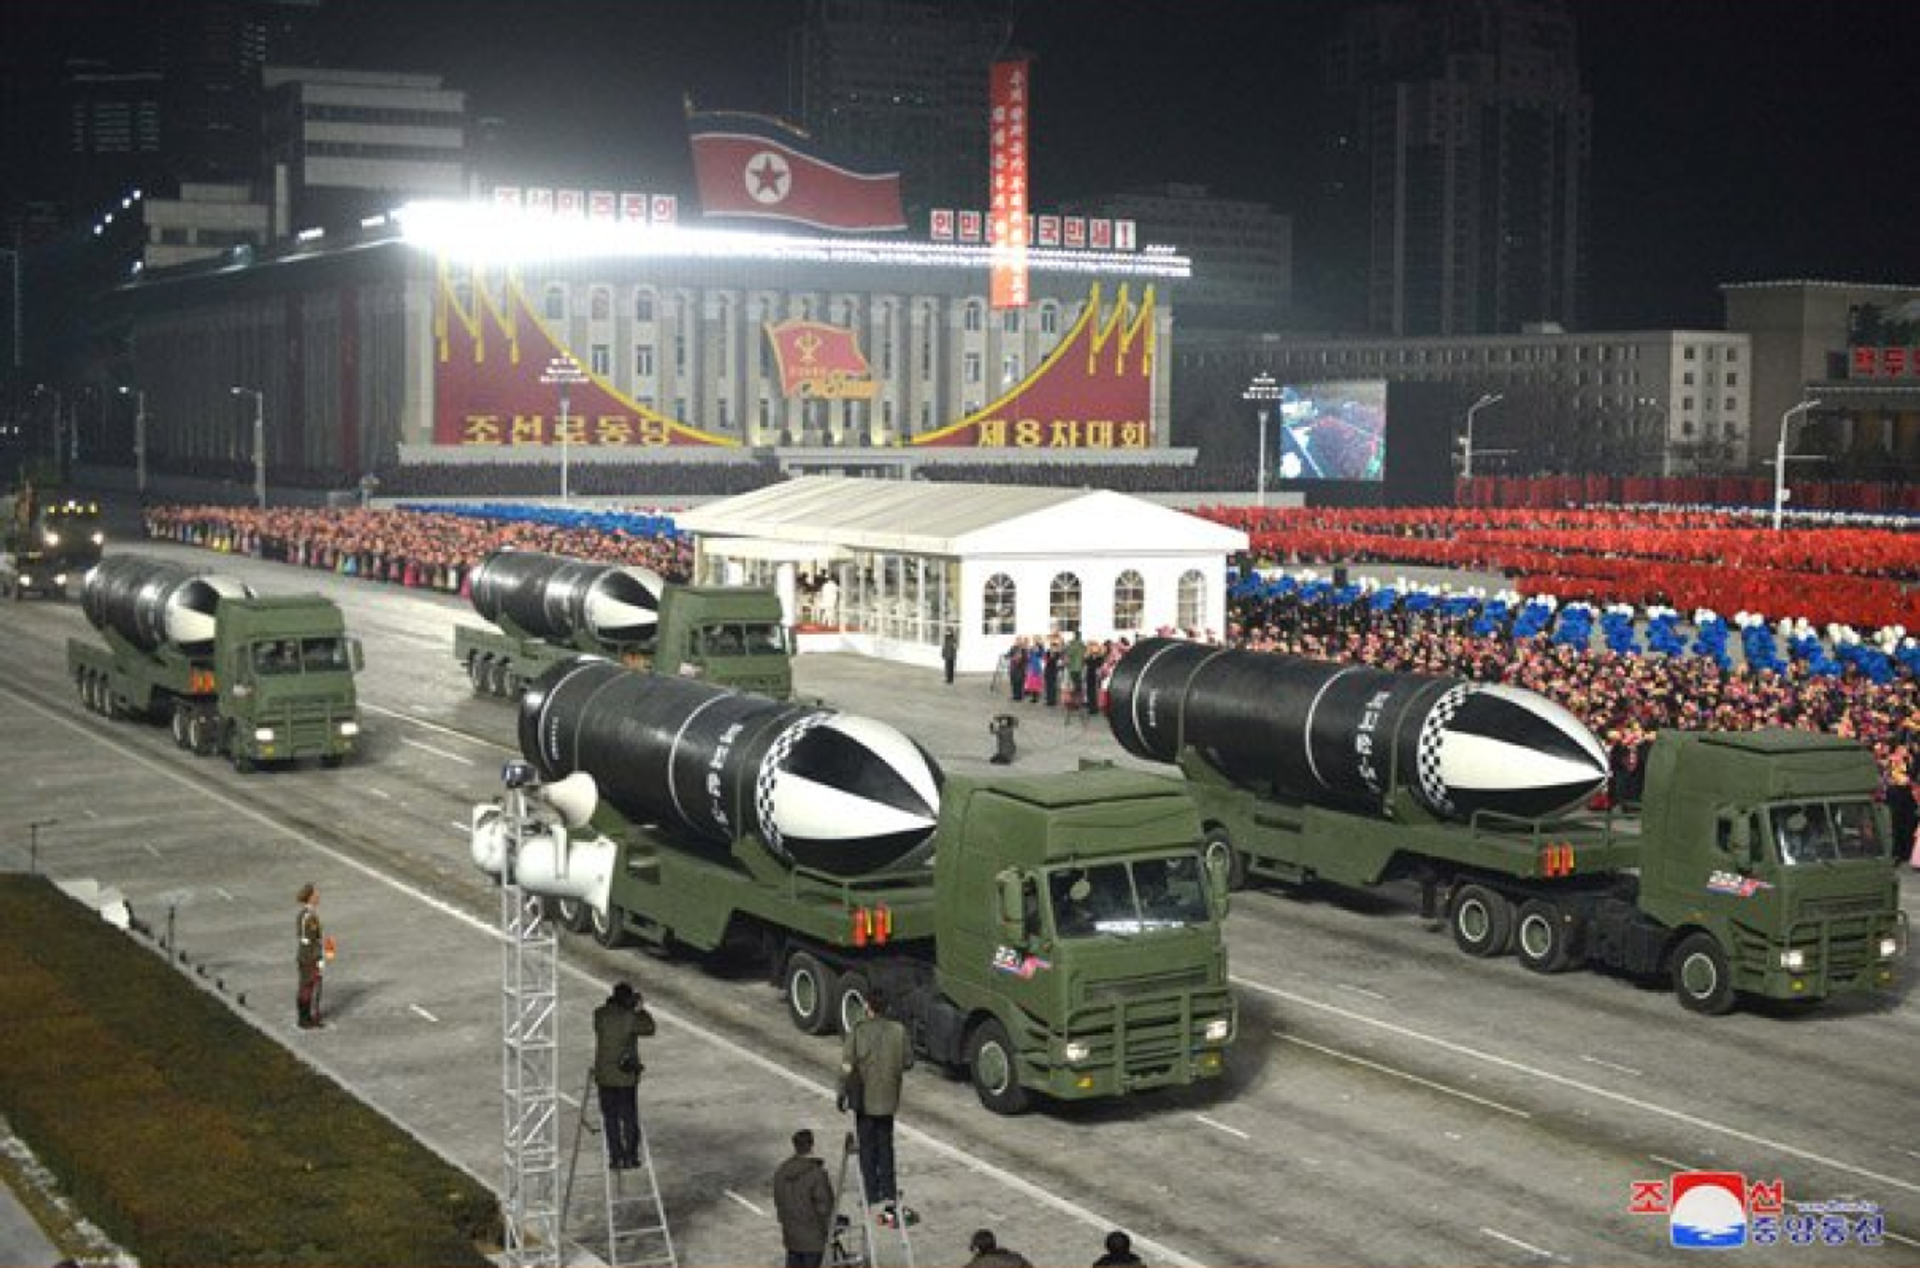 A new submarine-launched ballistic missile, provisionally designated the Pukguksong-5, is unveiled in a military parade in Pyongyang, DPRK, on January 14, 2021 - Sputnik International, 1920, 01.12.2021